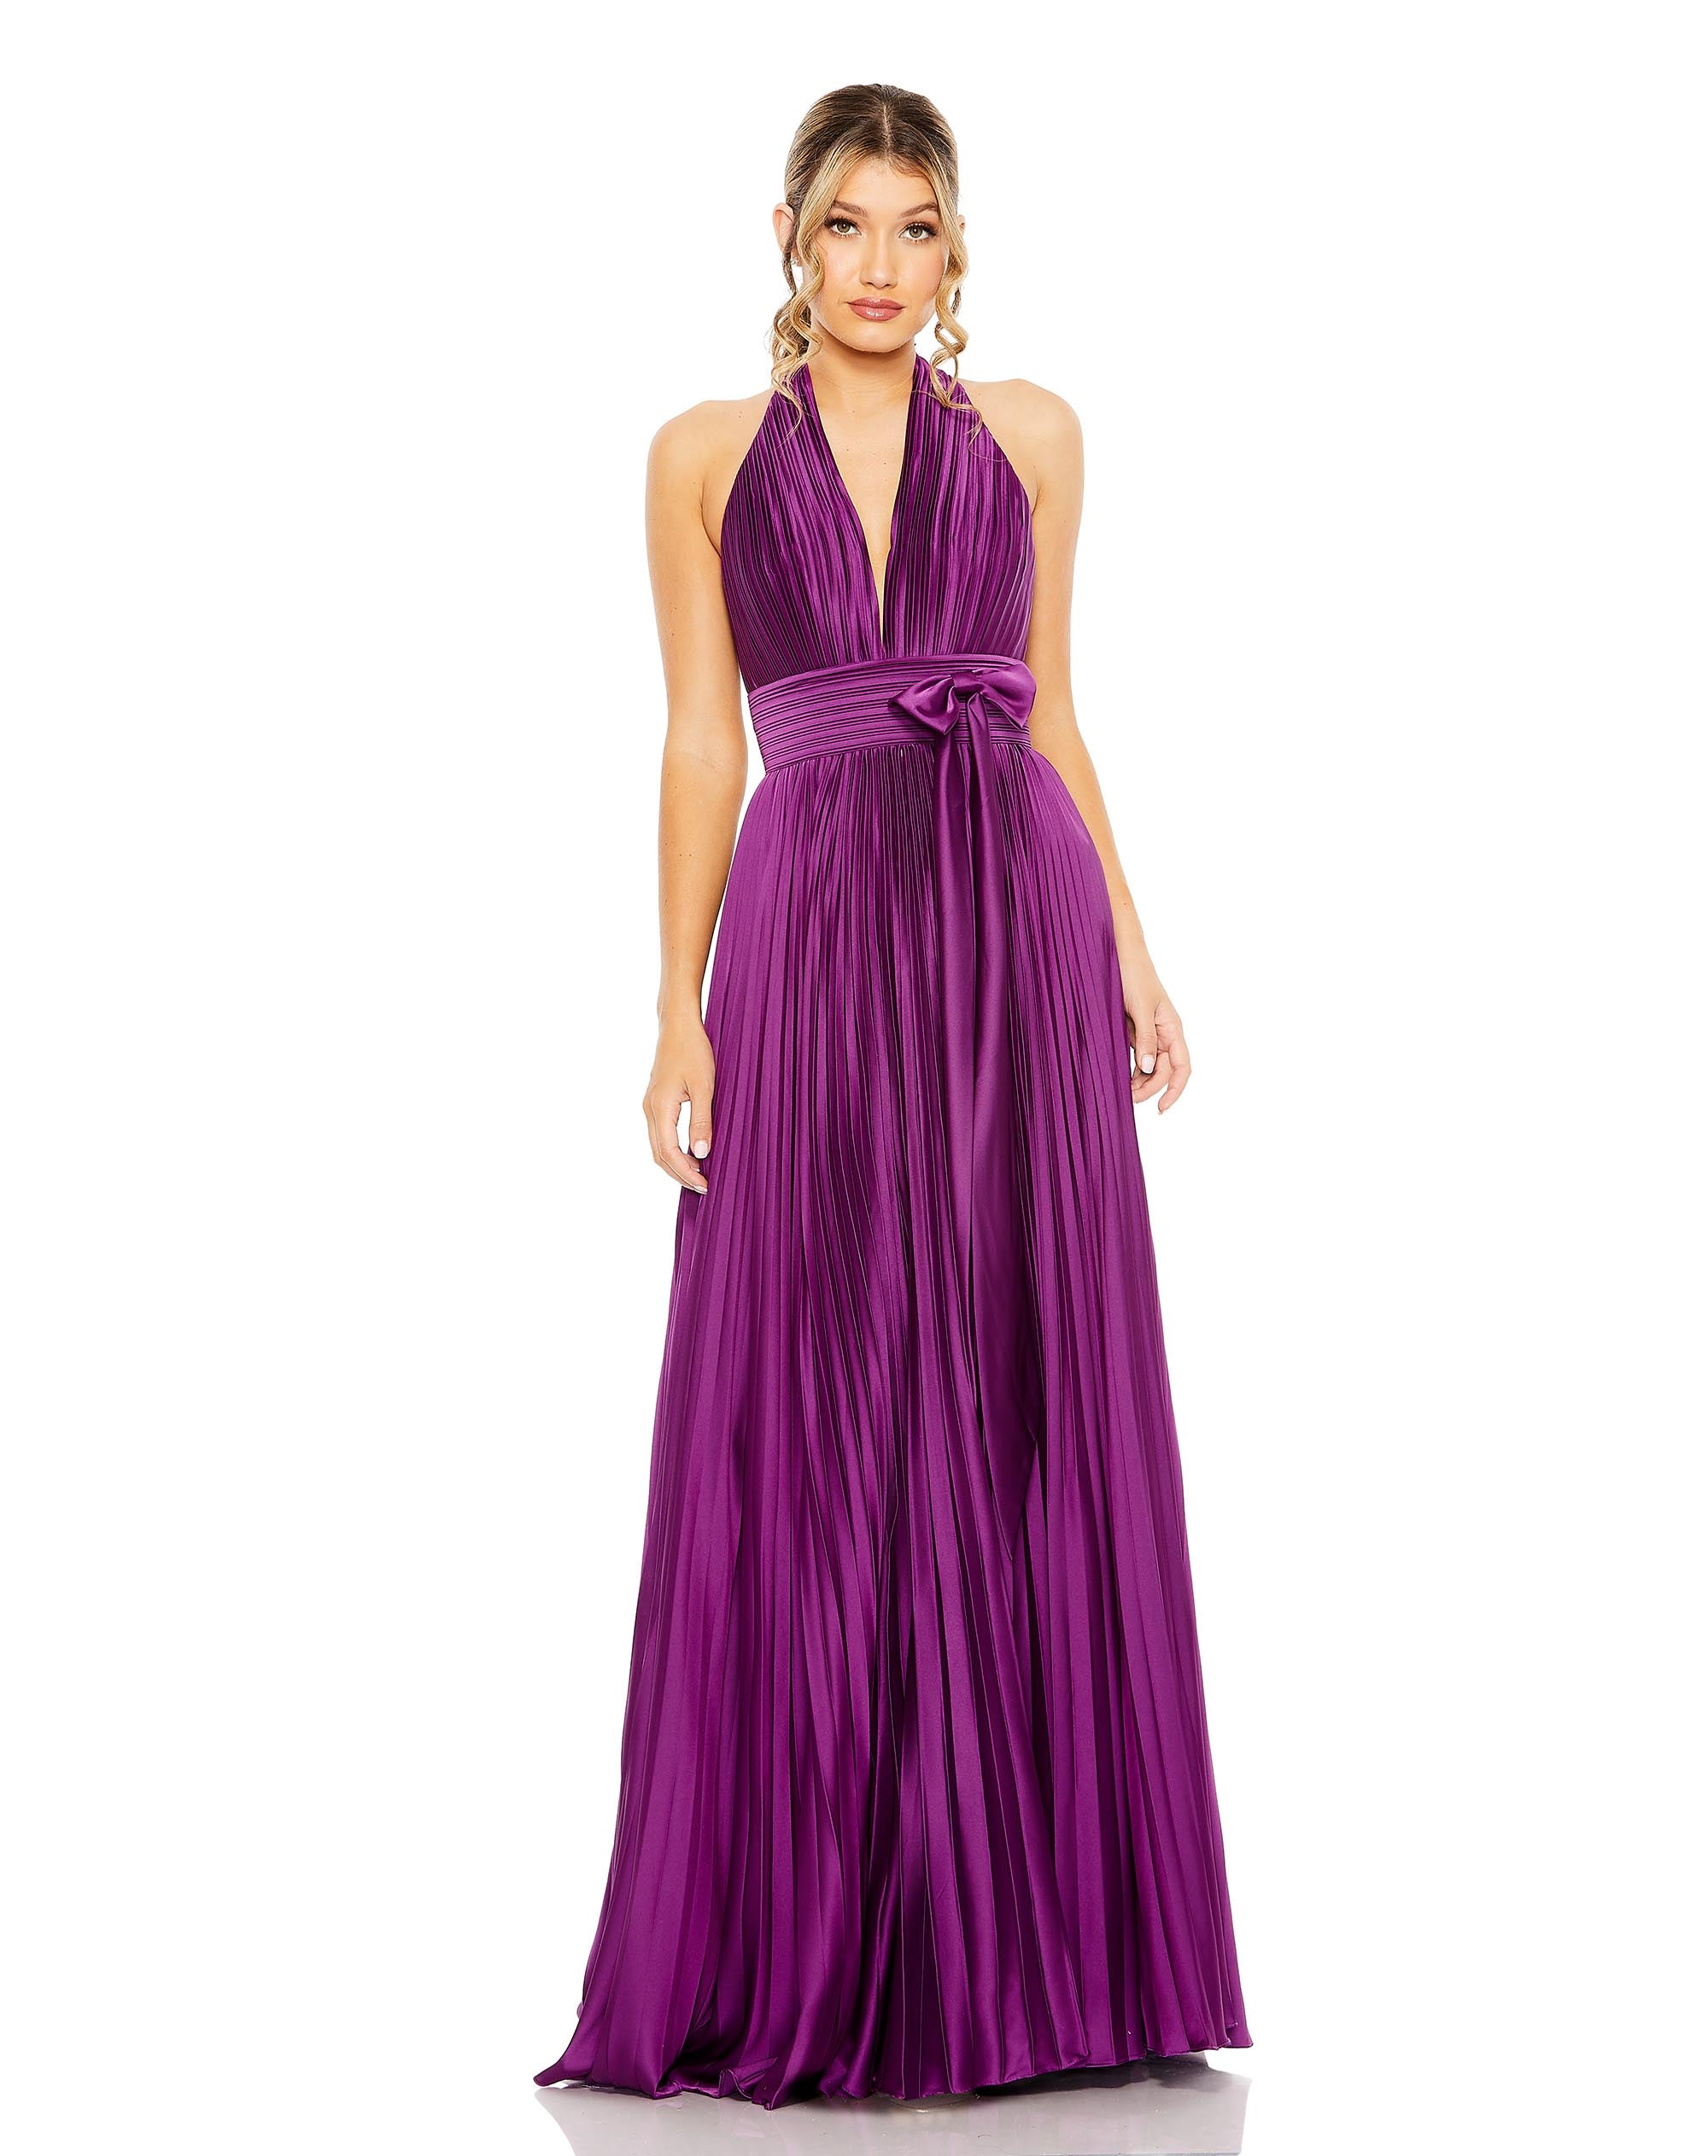 Pleated Halter Neck Gown with Center Bow